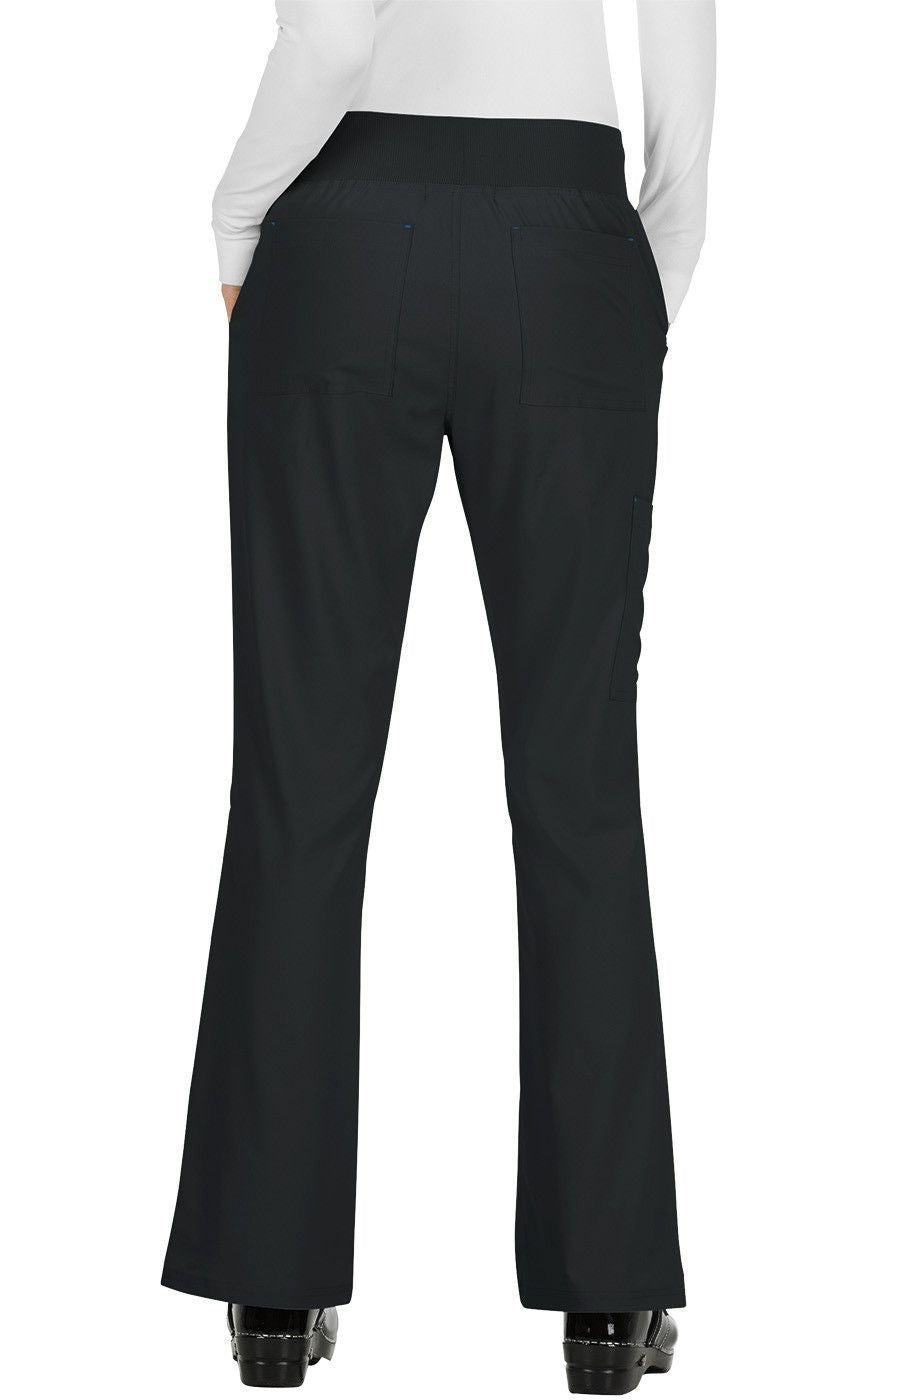 Laurie Pant  by KOI XS-5XL  / Black